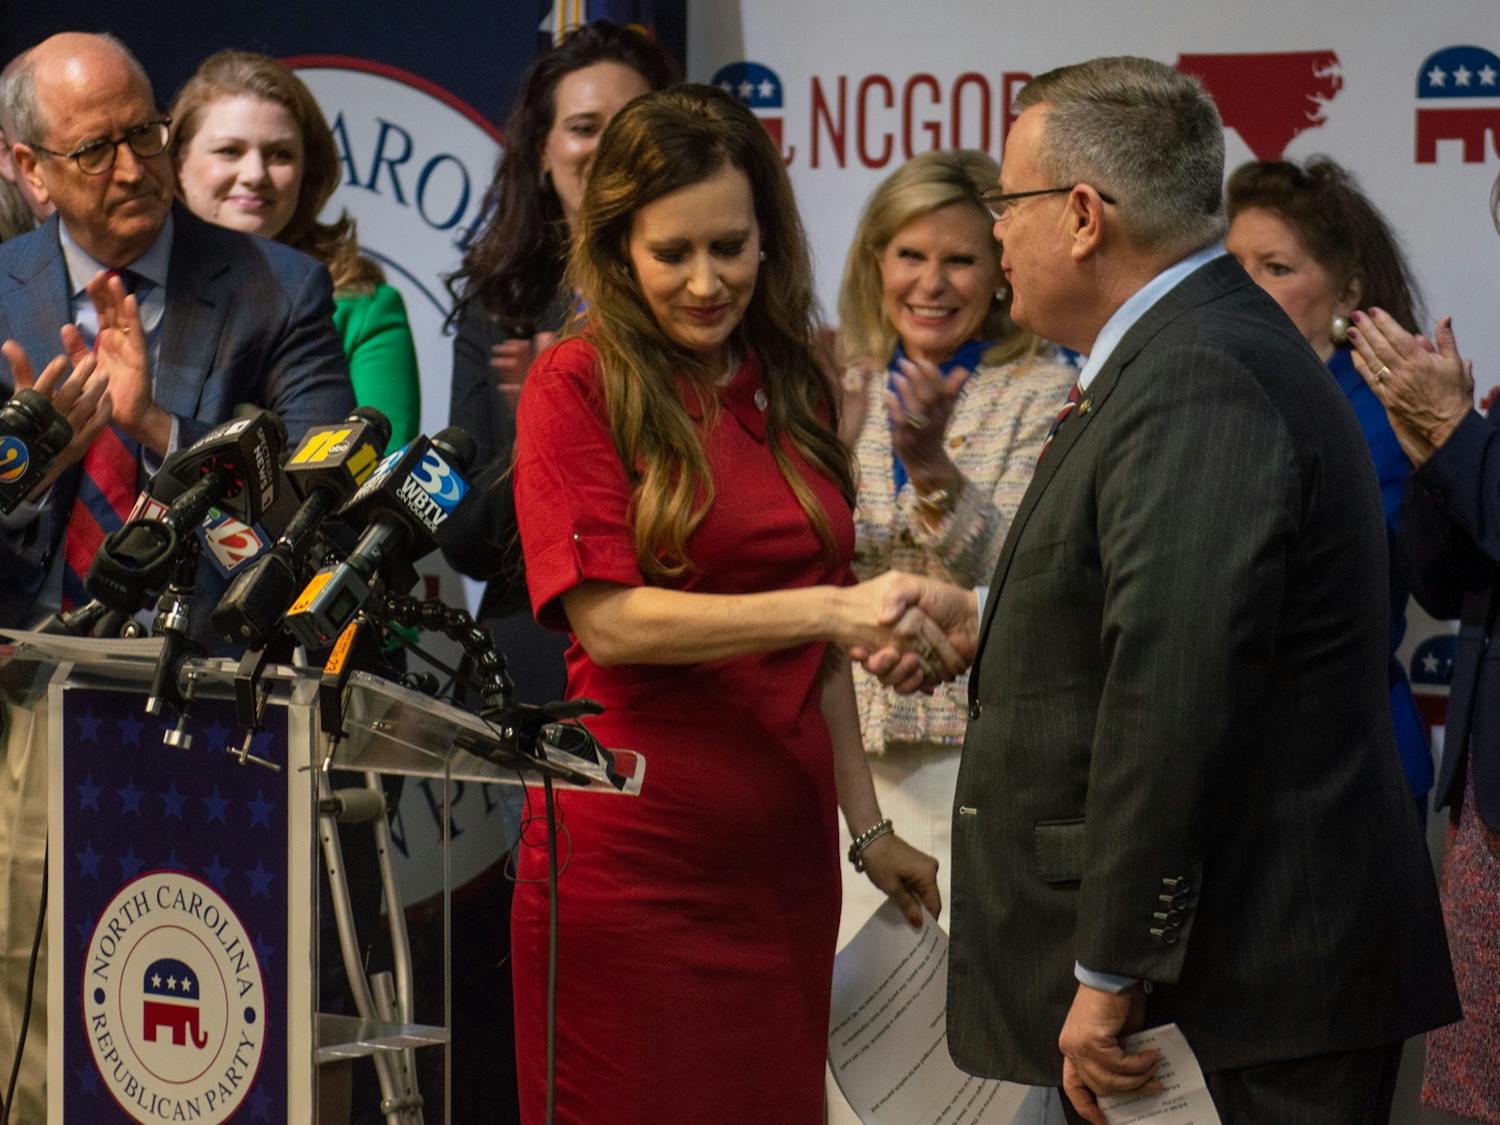 North Carolina Rep. Tricia Cotham (R-Mecklenburg) shakes the hand of N.C. House Speaker Tim Moore (R-Cleveland, Rutherford) at the N.C. GOP Headquarters in Raleigh, N.C., after she officially announced her change in party afflilation. Cotham was previously a Democrat until her announcement on Wednesday, April 5.